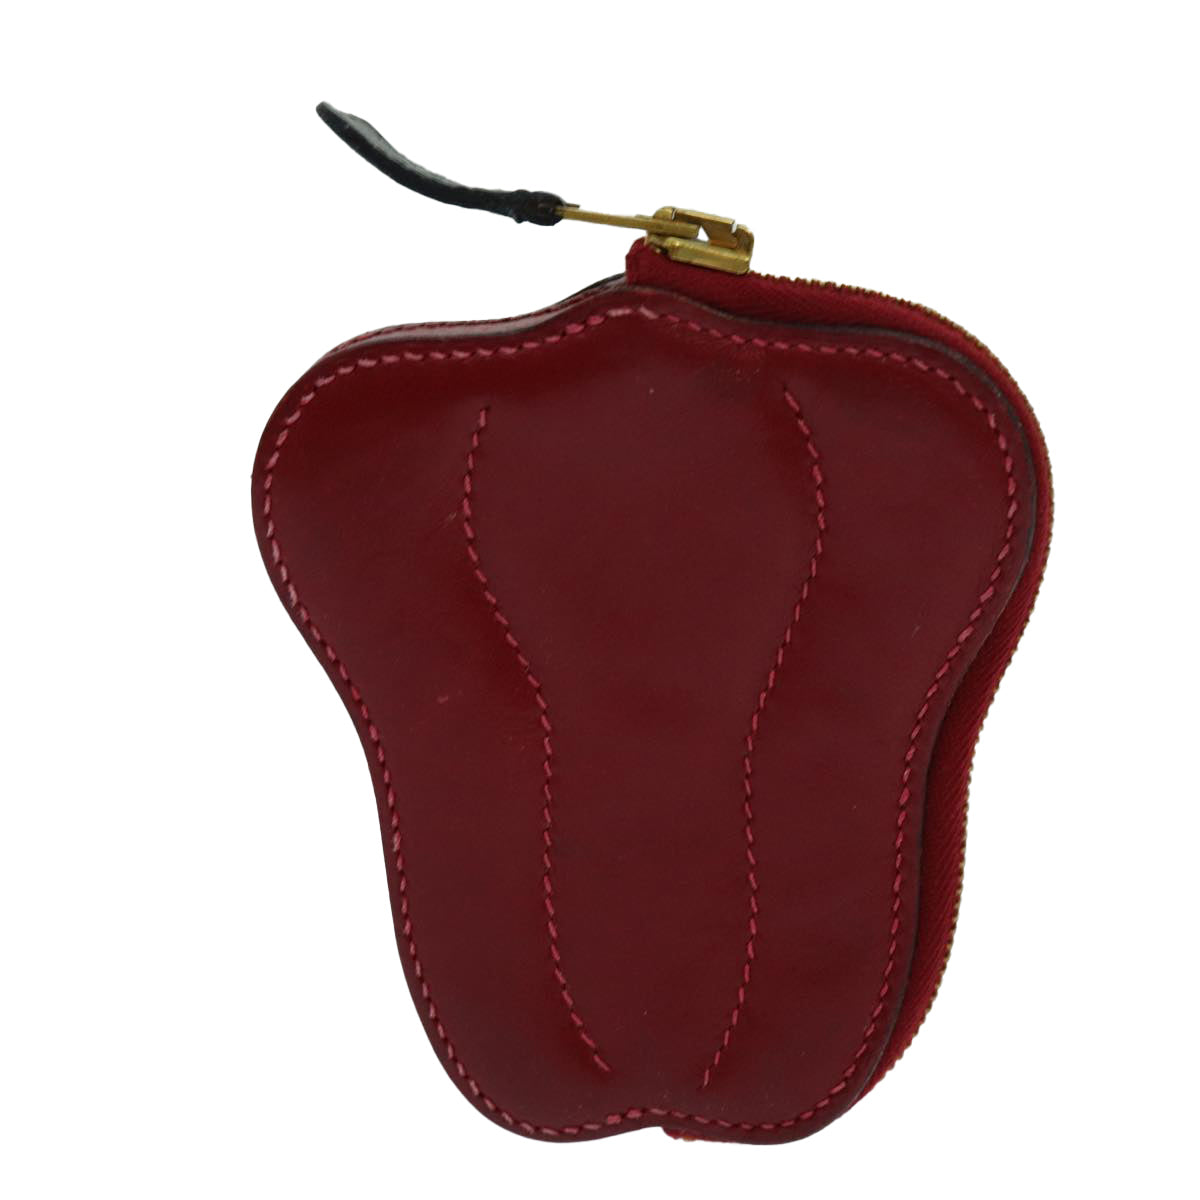 HERMES Fruit Motif Coin Purse Leather Red Auth 70056 - 0